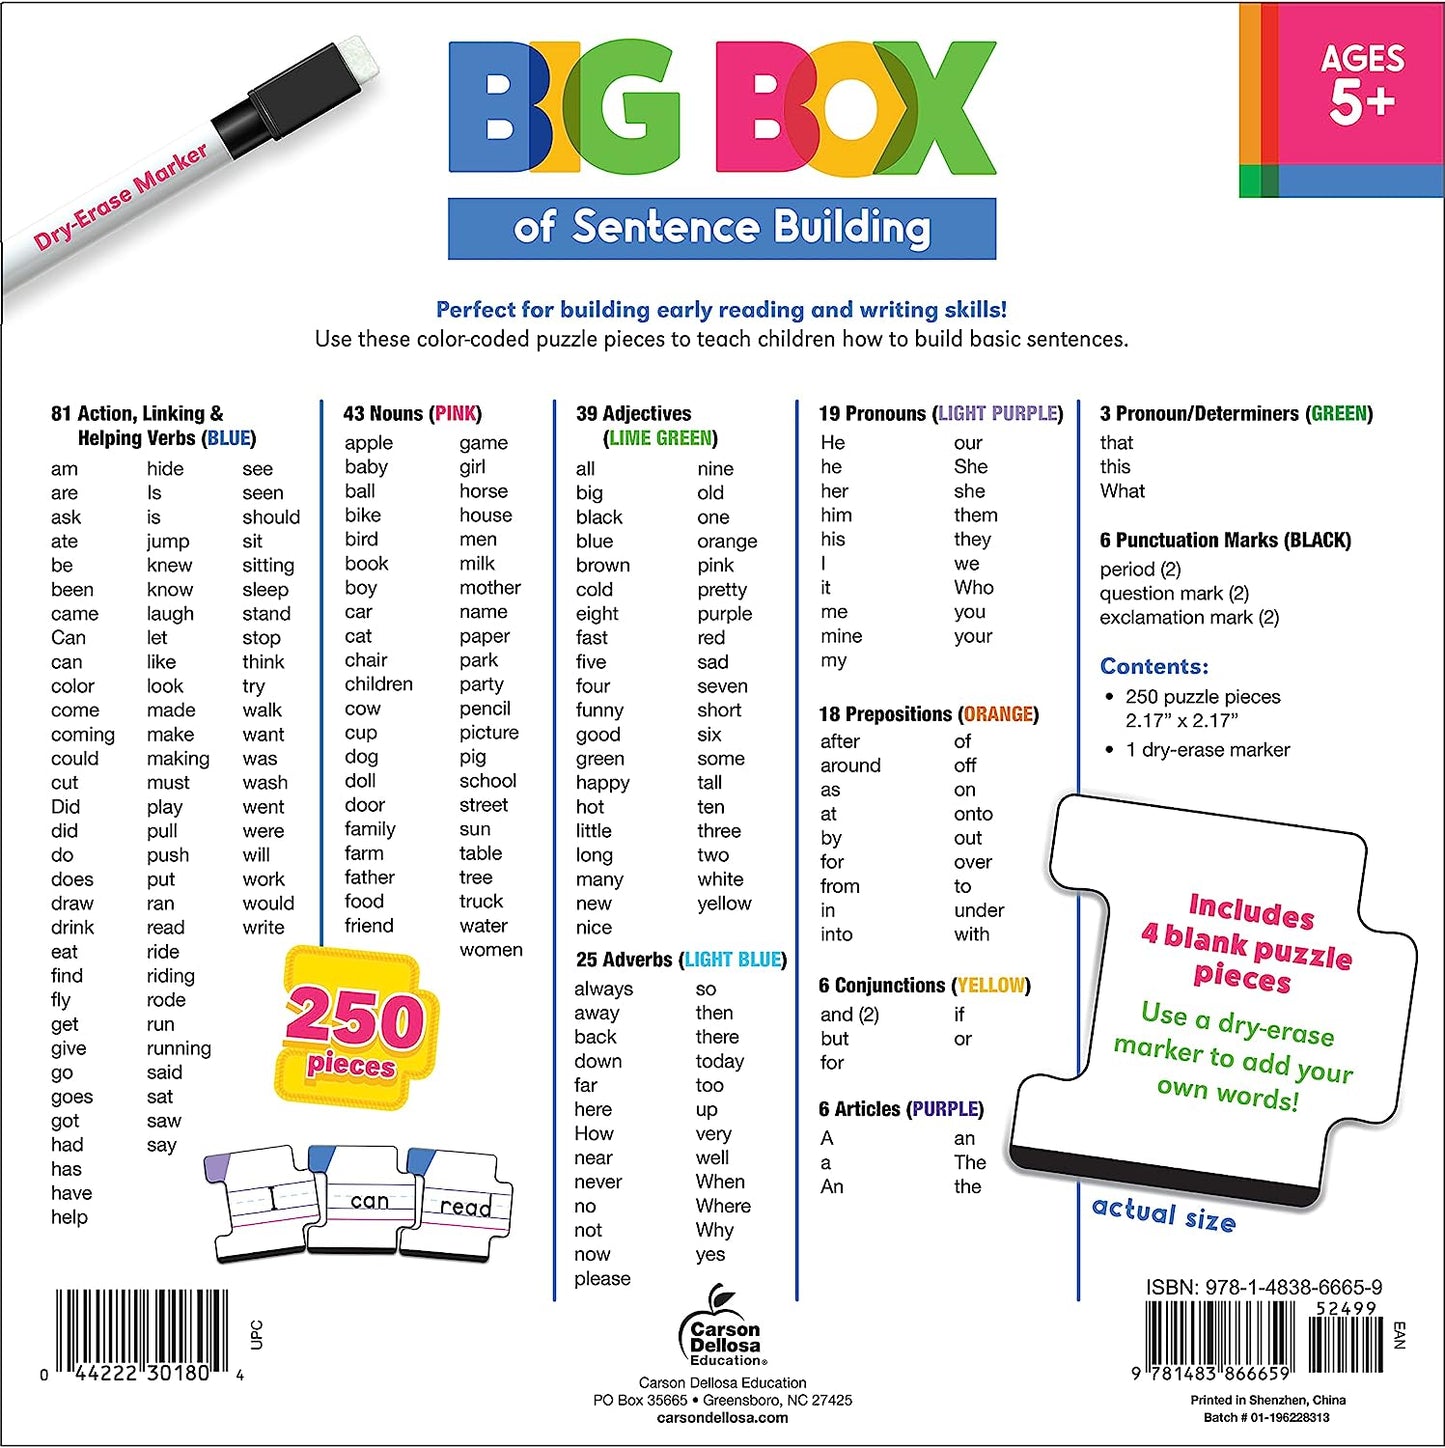 Carson Dellosa Big Box of Sentence Building for Kids, Sight Word Game with 250 Color-Coded Sight Words and Punctuation Cards for Building Sentence Strips, Word Games, Word Puzzles